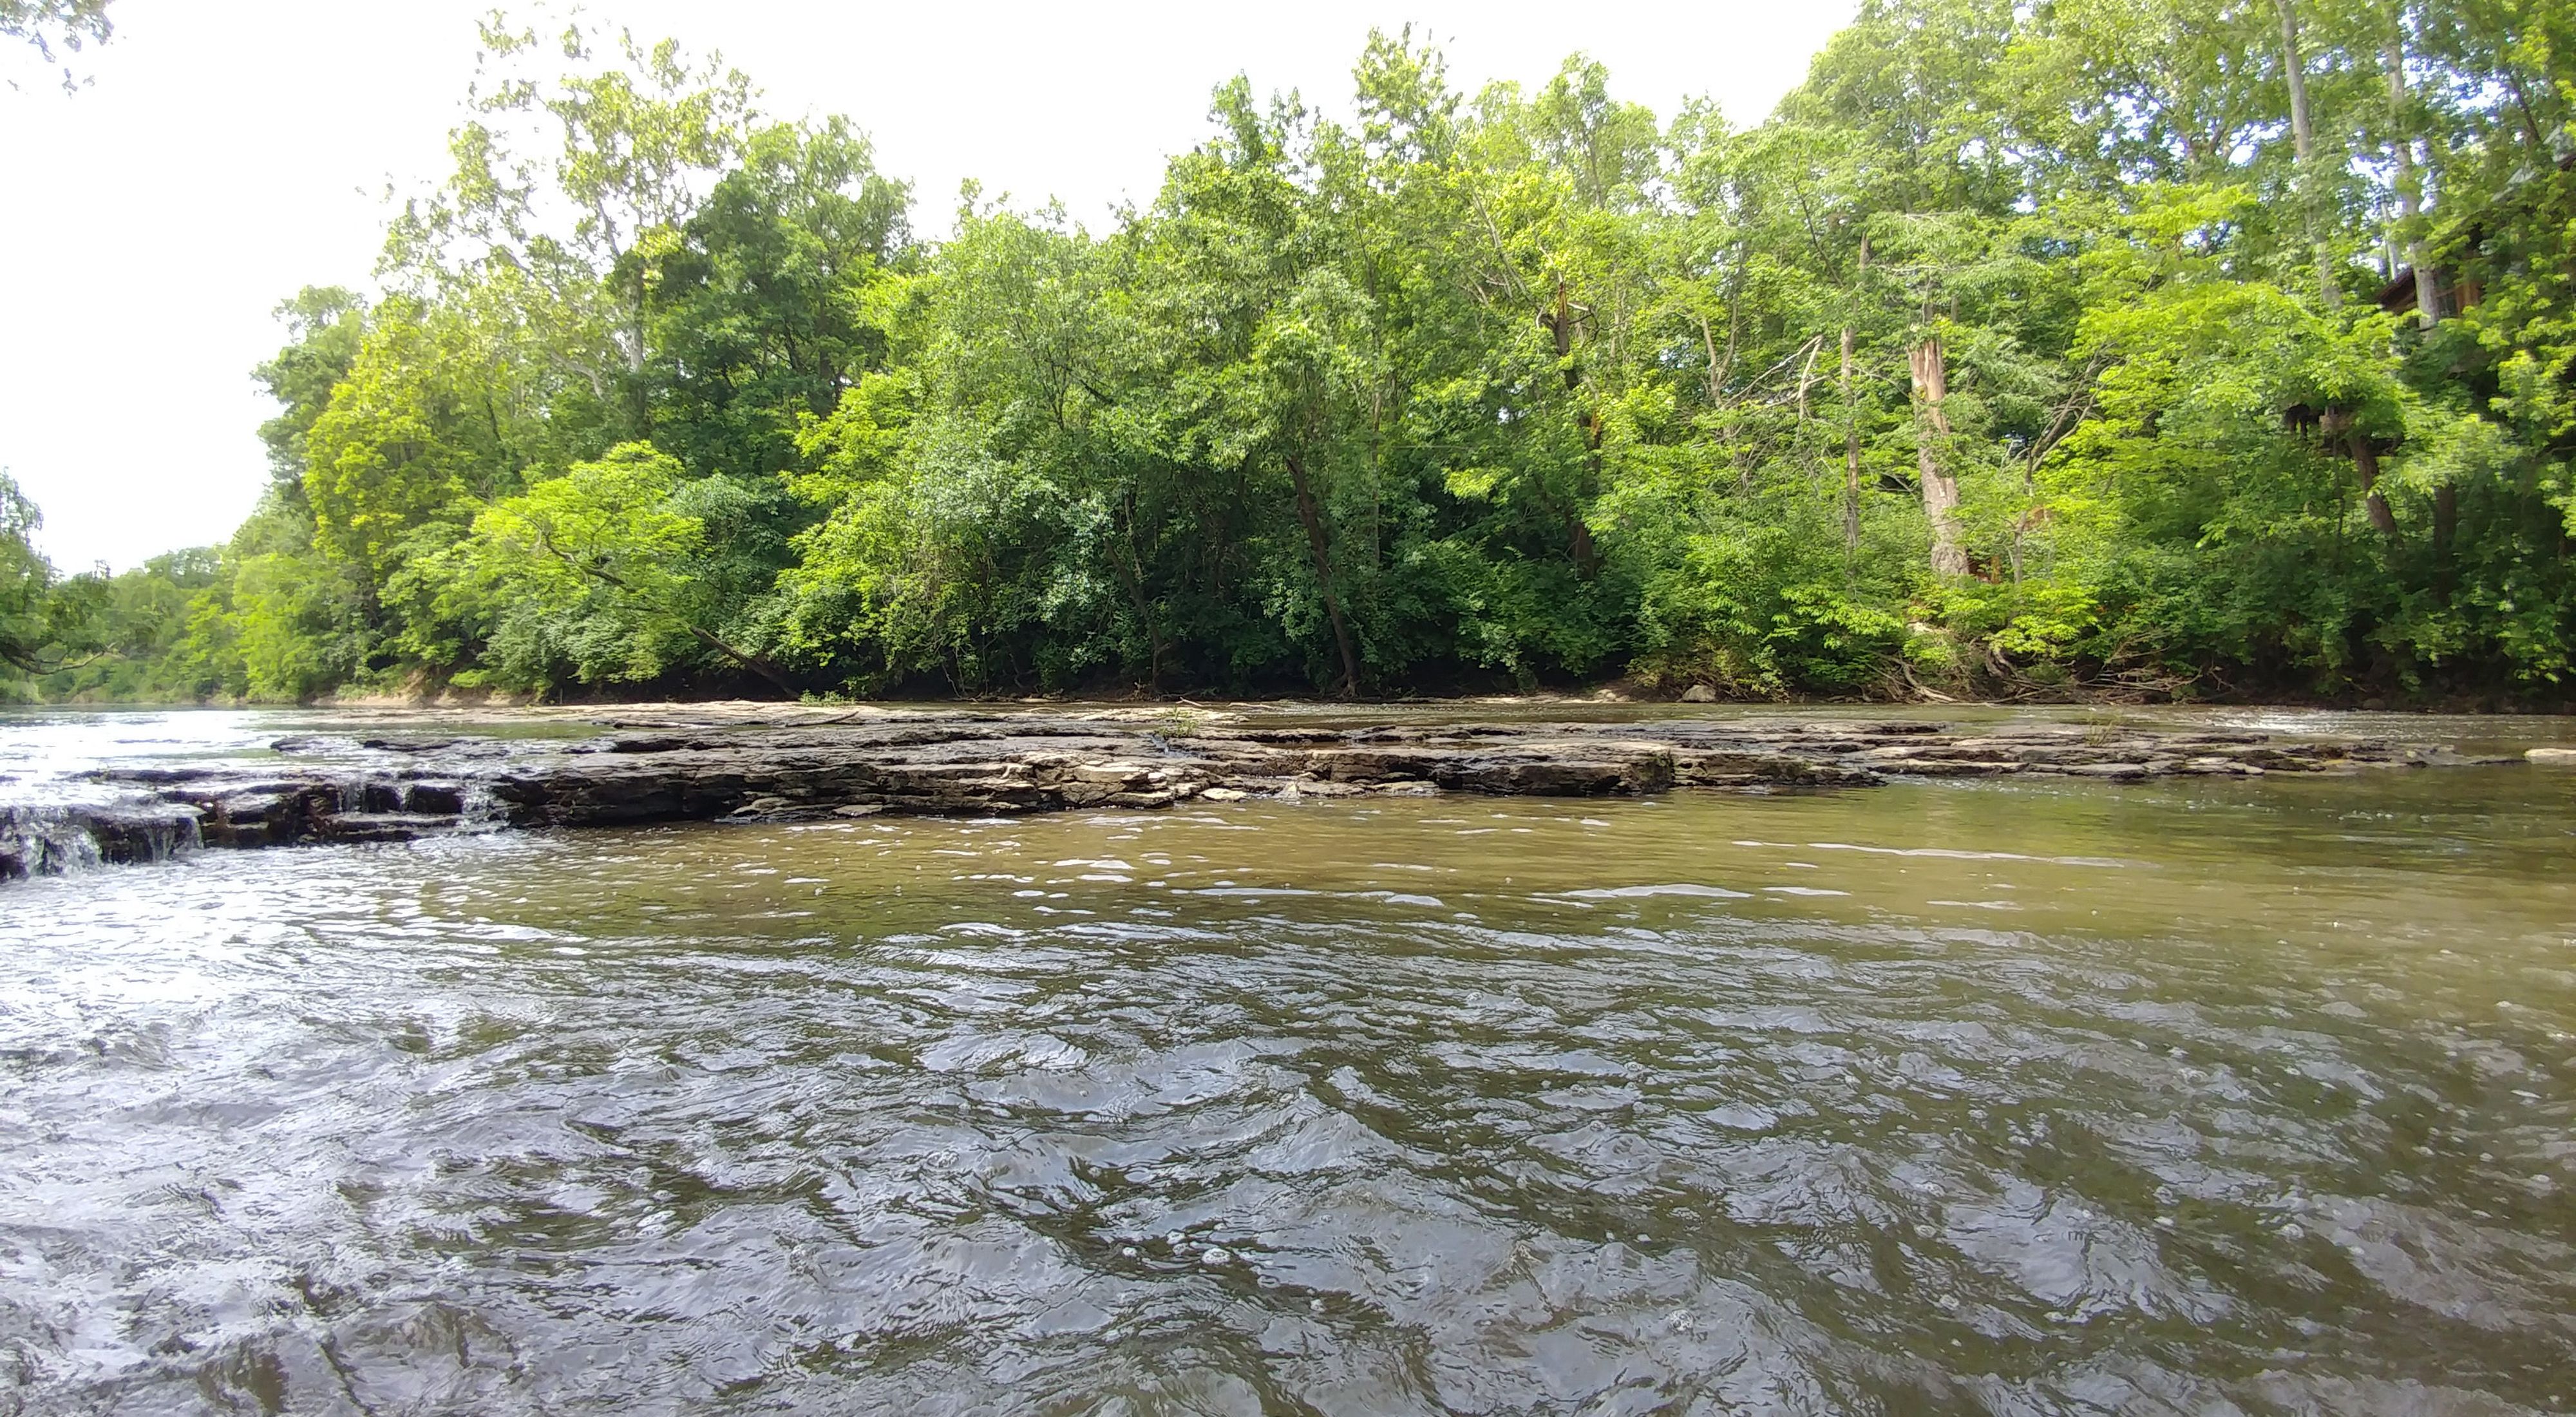 A broad river with trees on its bank.